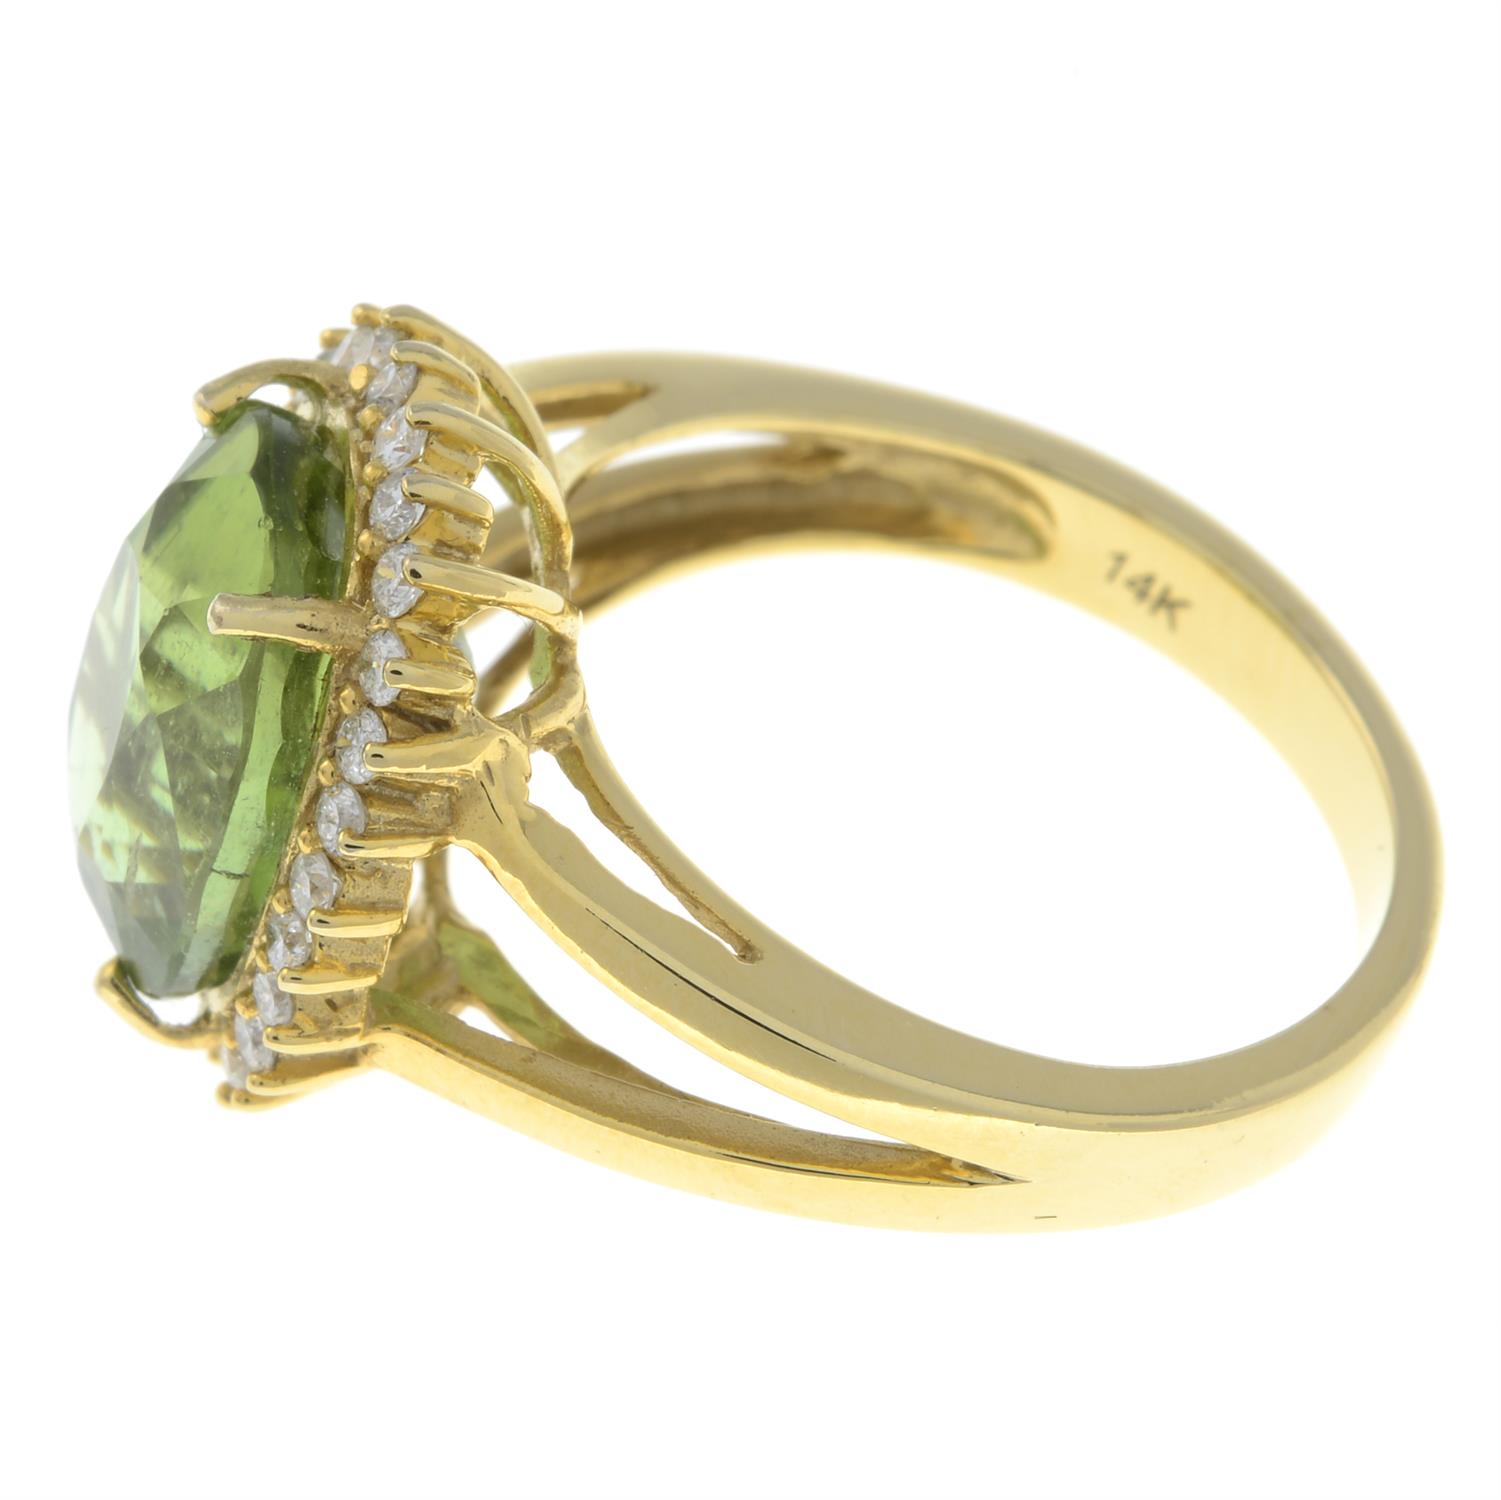 Green tourmaline and diamond cluster ring - Image 4 of 5